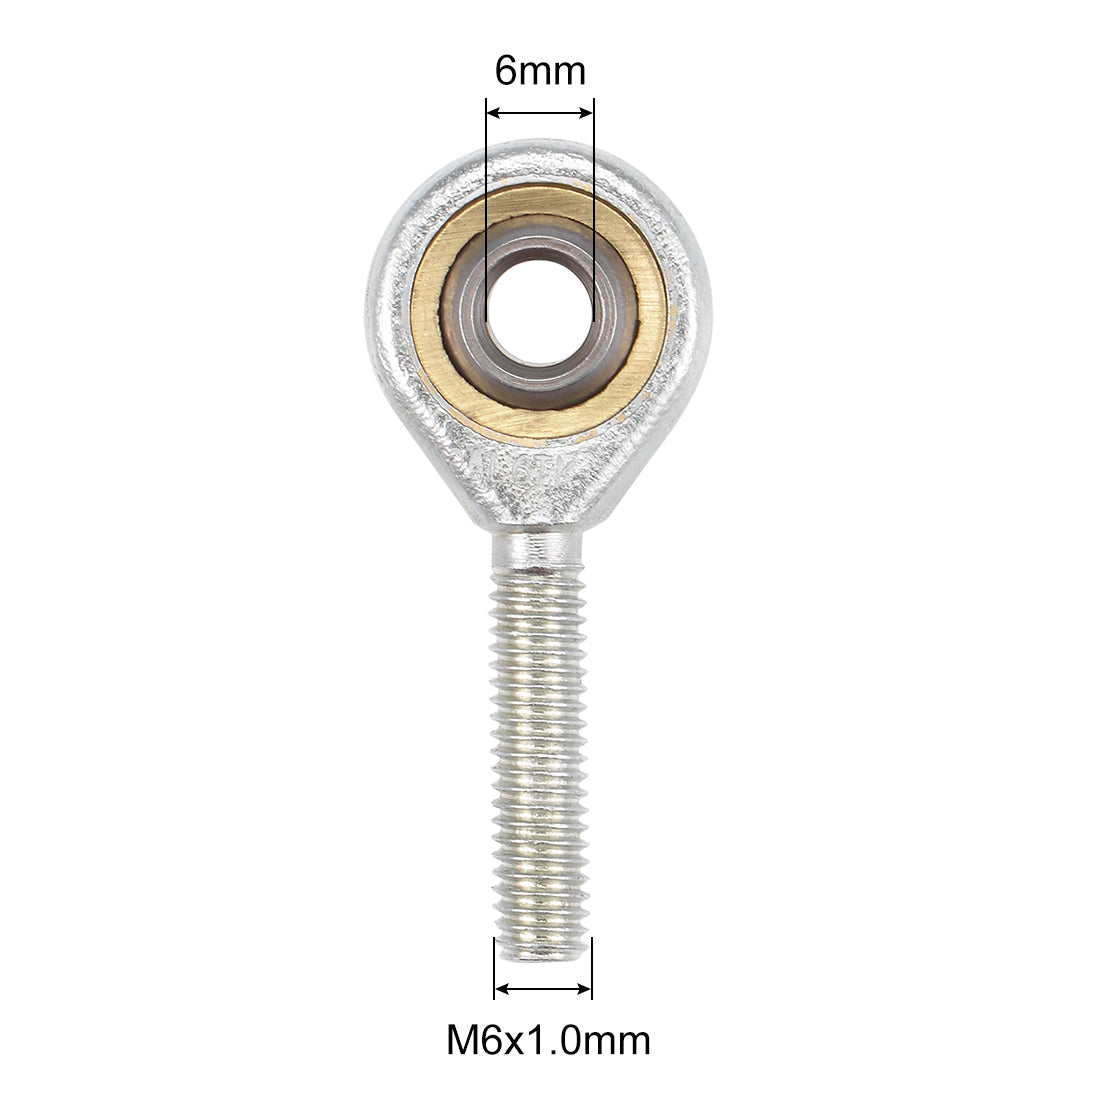 uxcell Uxcell 6mm Rod End Bearing M6x1.0mm Rod Ends Ball Joint Male Left Hand Thread 4pcs